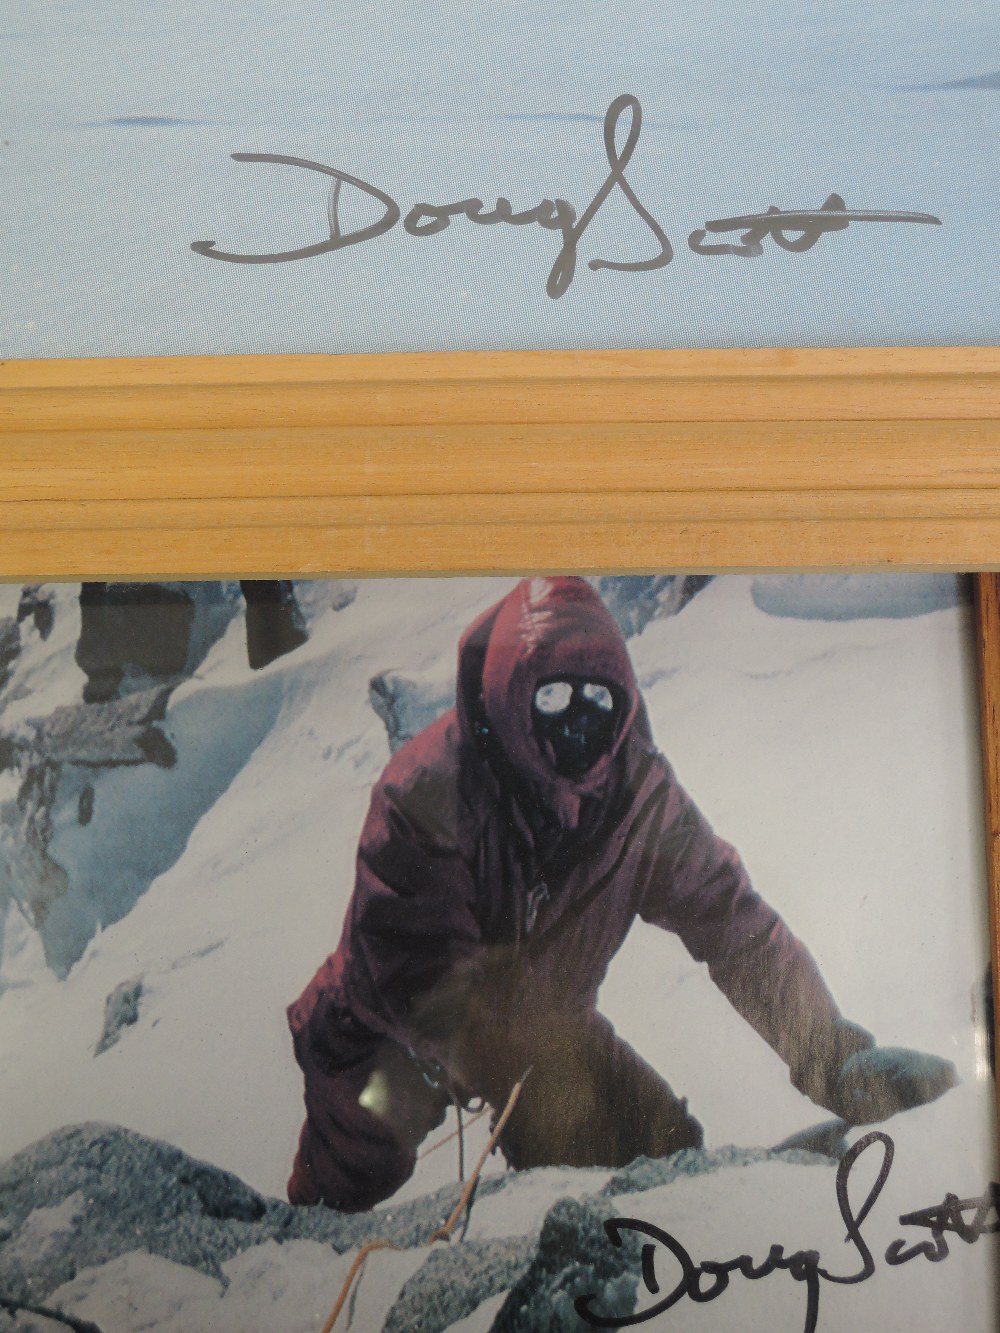 Two photographs, mountaineering interest, snow capped mountains, signed, Doug Scott